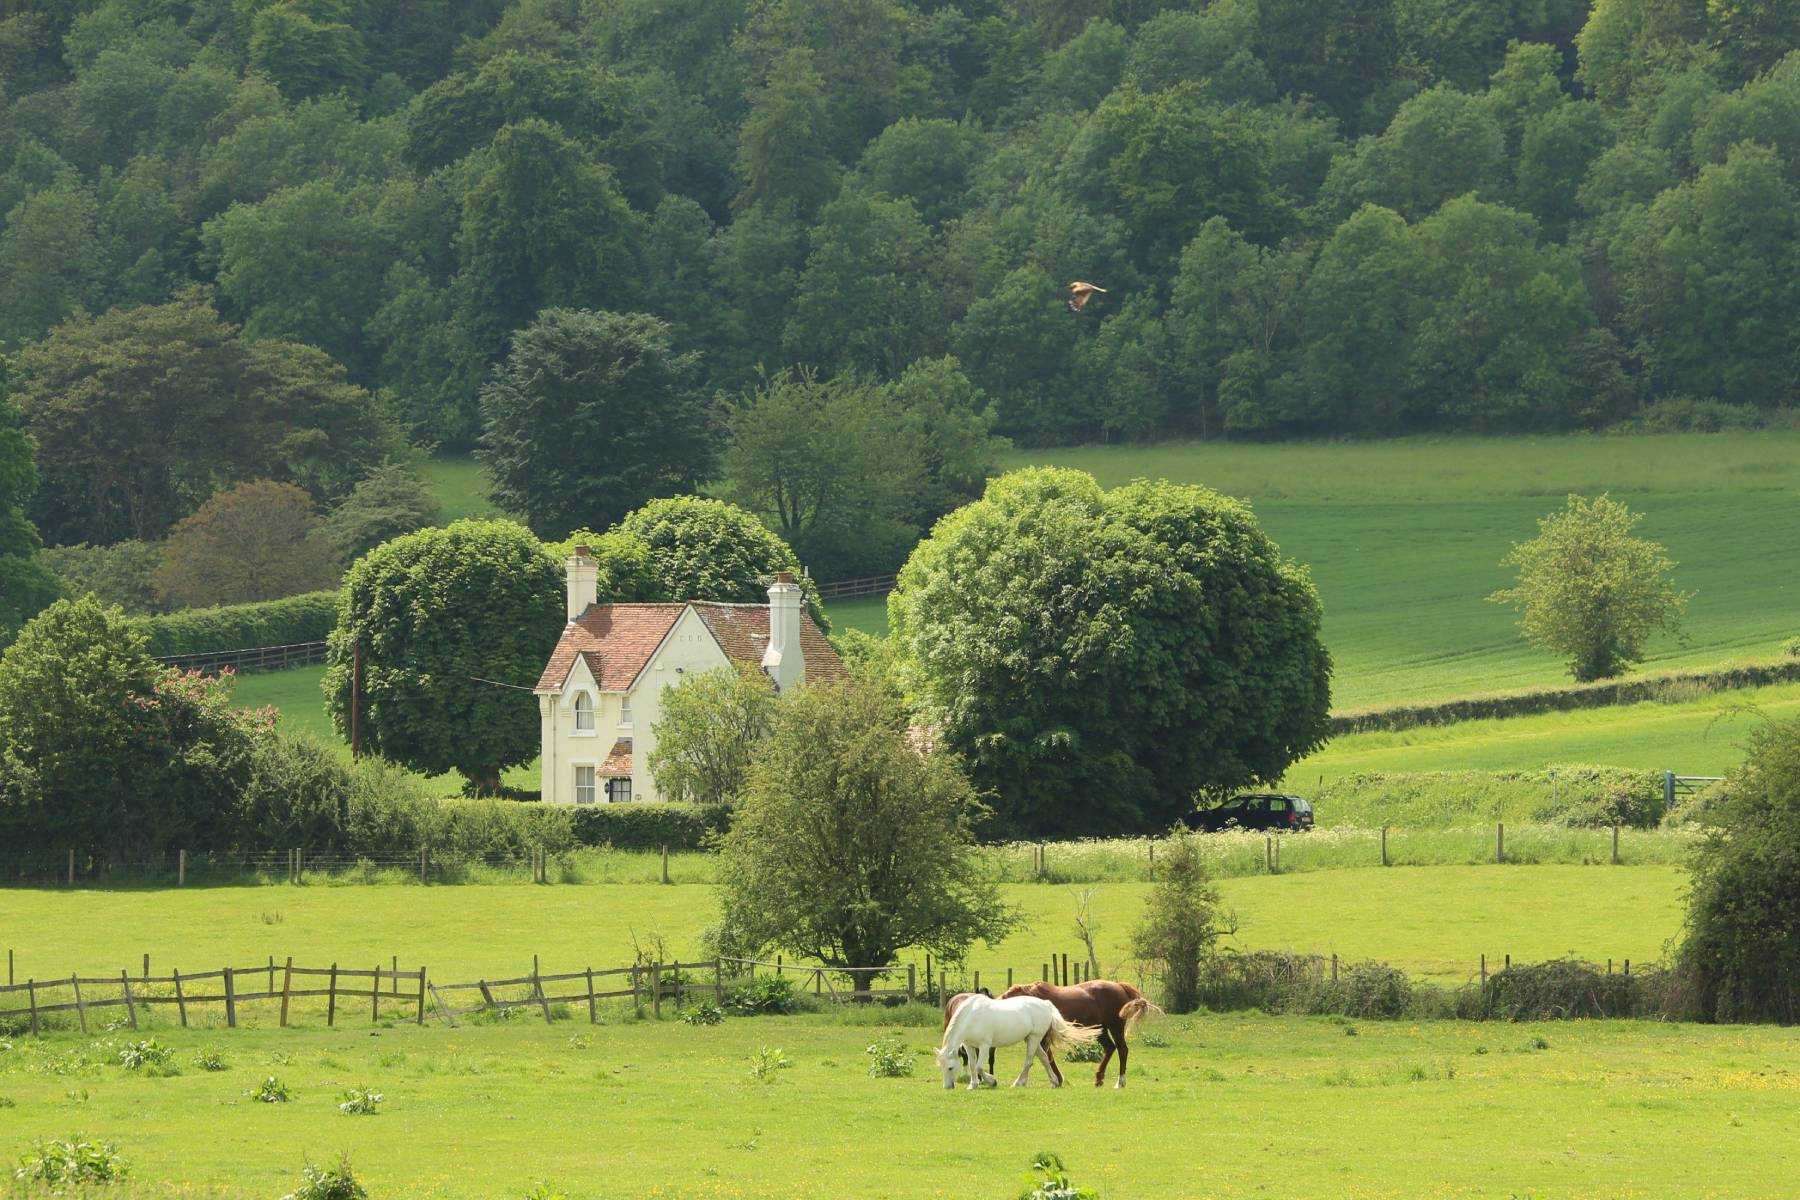 Equestrian Property: A Buyer’s Guide